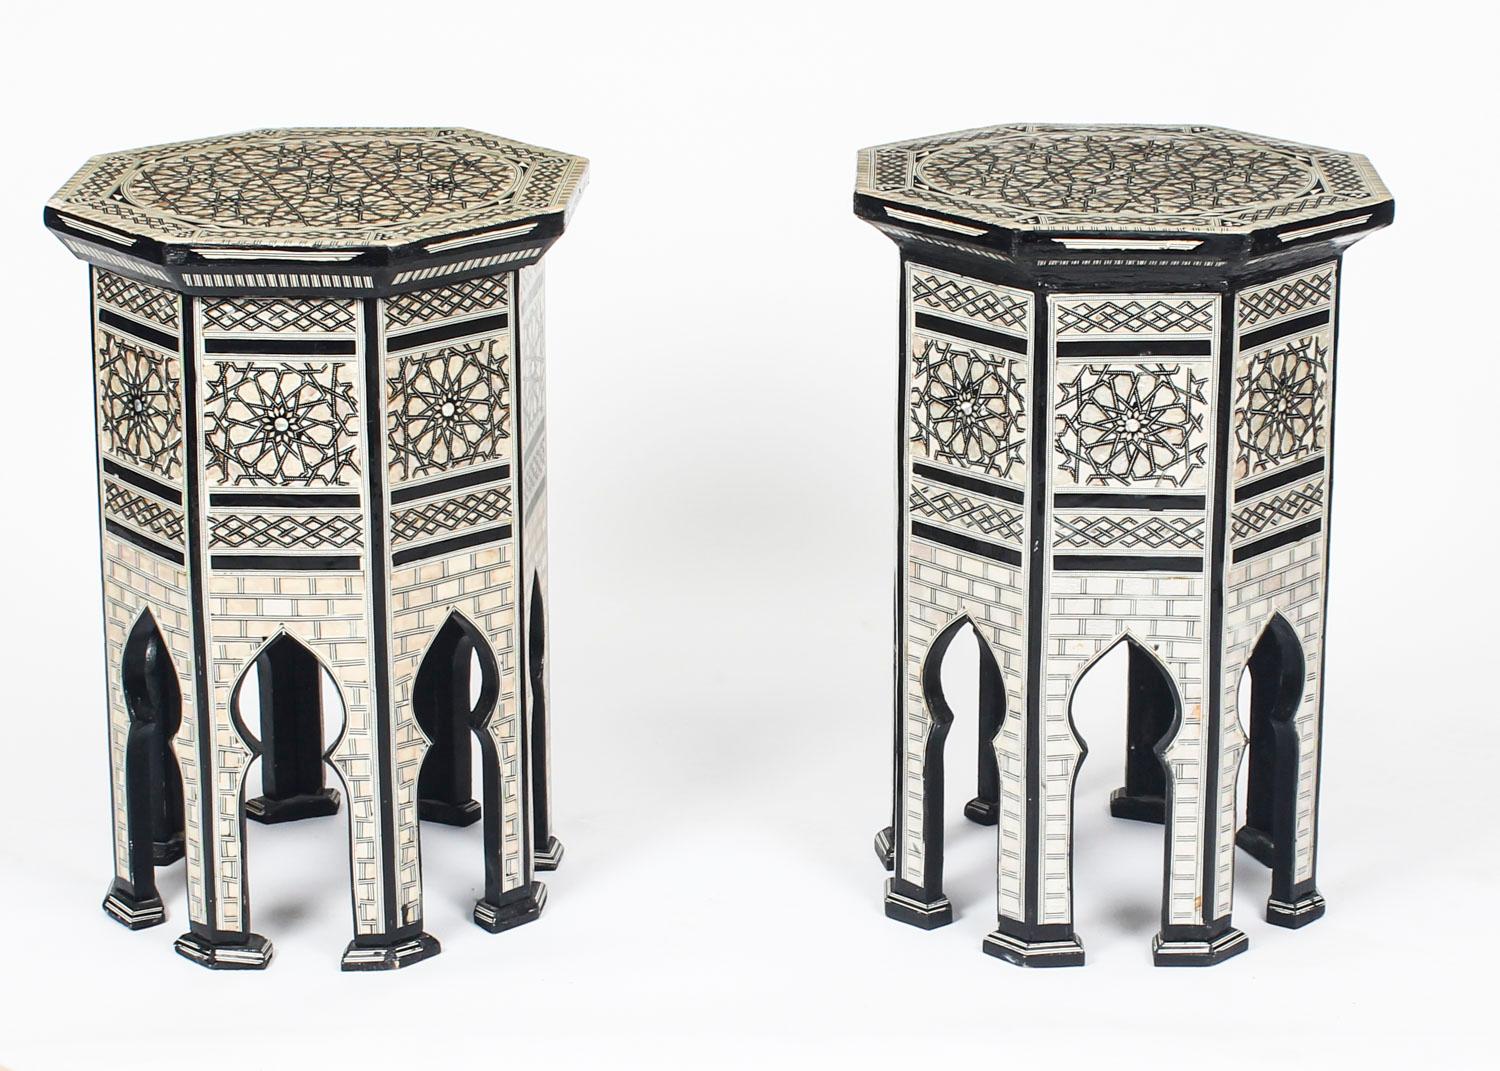 This is a superb intricately inlaid pair of side tables decorated with mother of pearl from Damascus and dating from the mid-20th century.

The octagonally shaped tables featurs beautifully detailed inlaid mother of pearl parquetry in interlocking